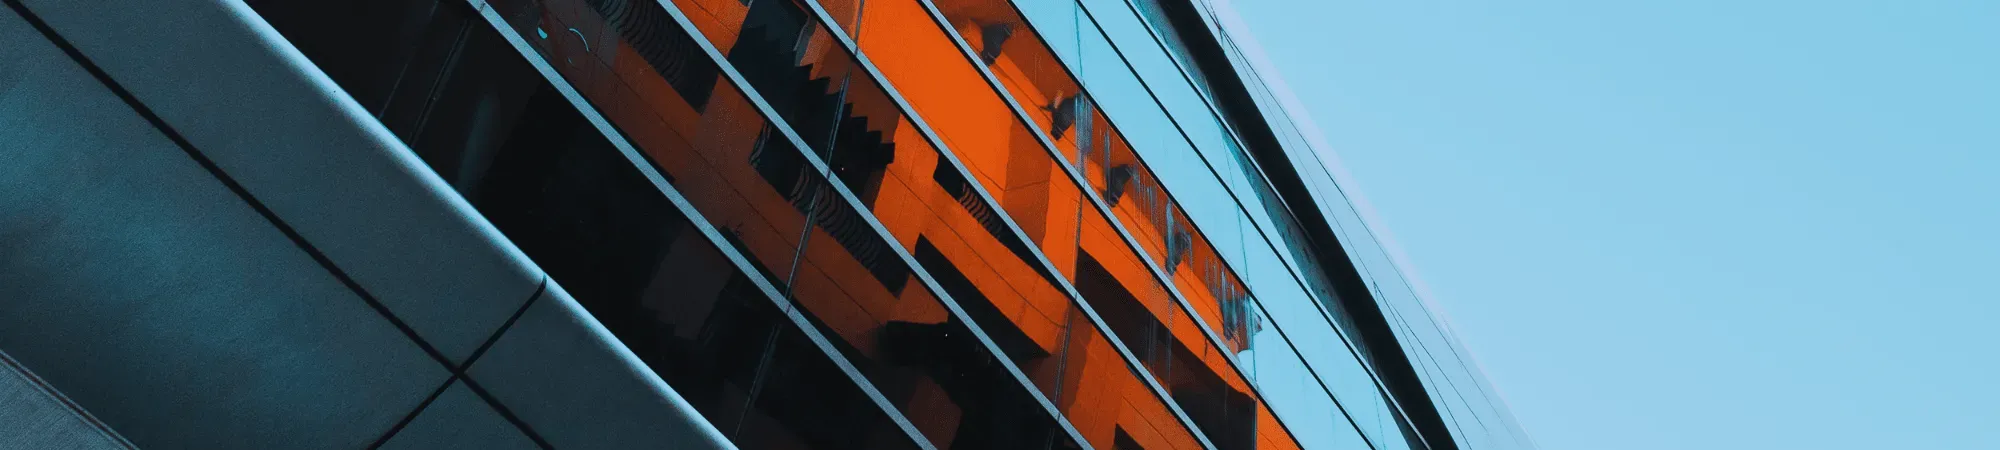 A modern grey building with orange buildings reflected in the windows